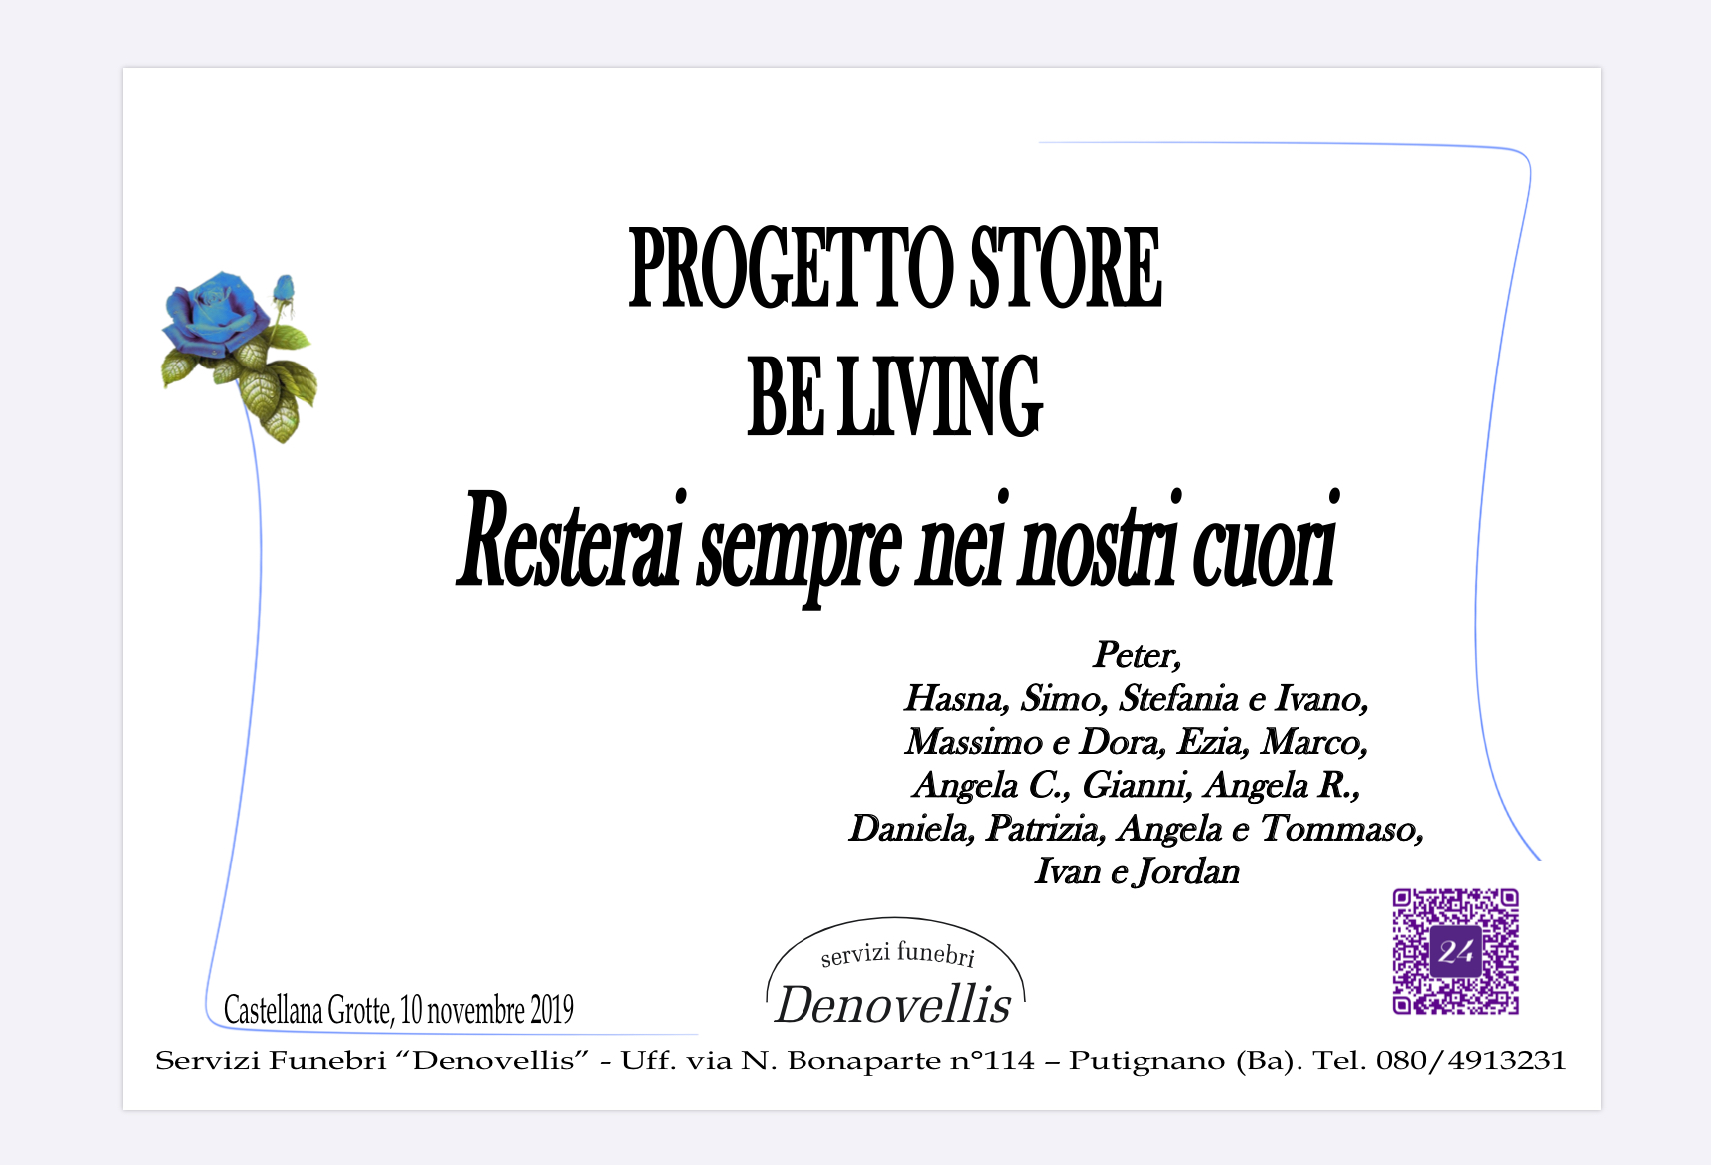 Progetto Store Be Living